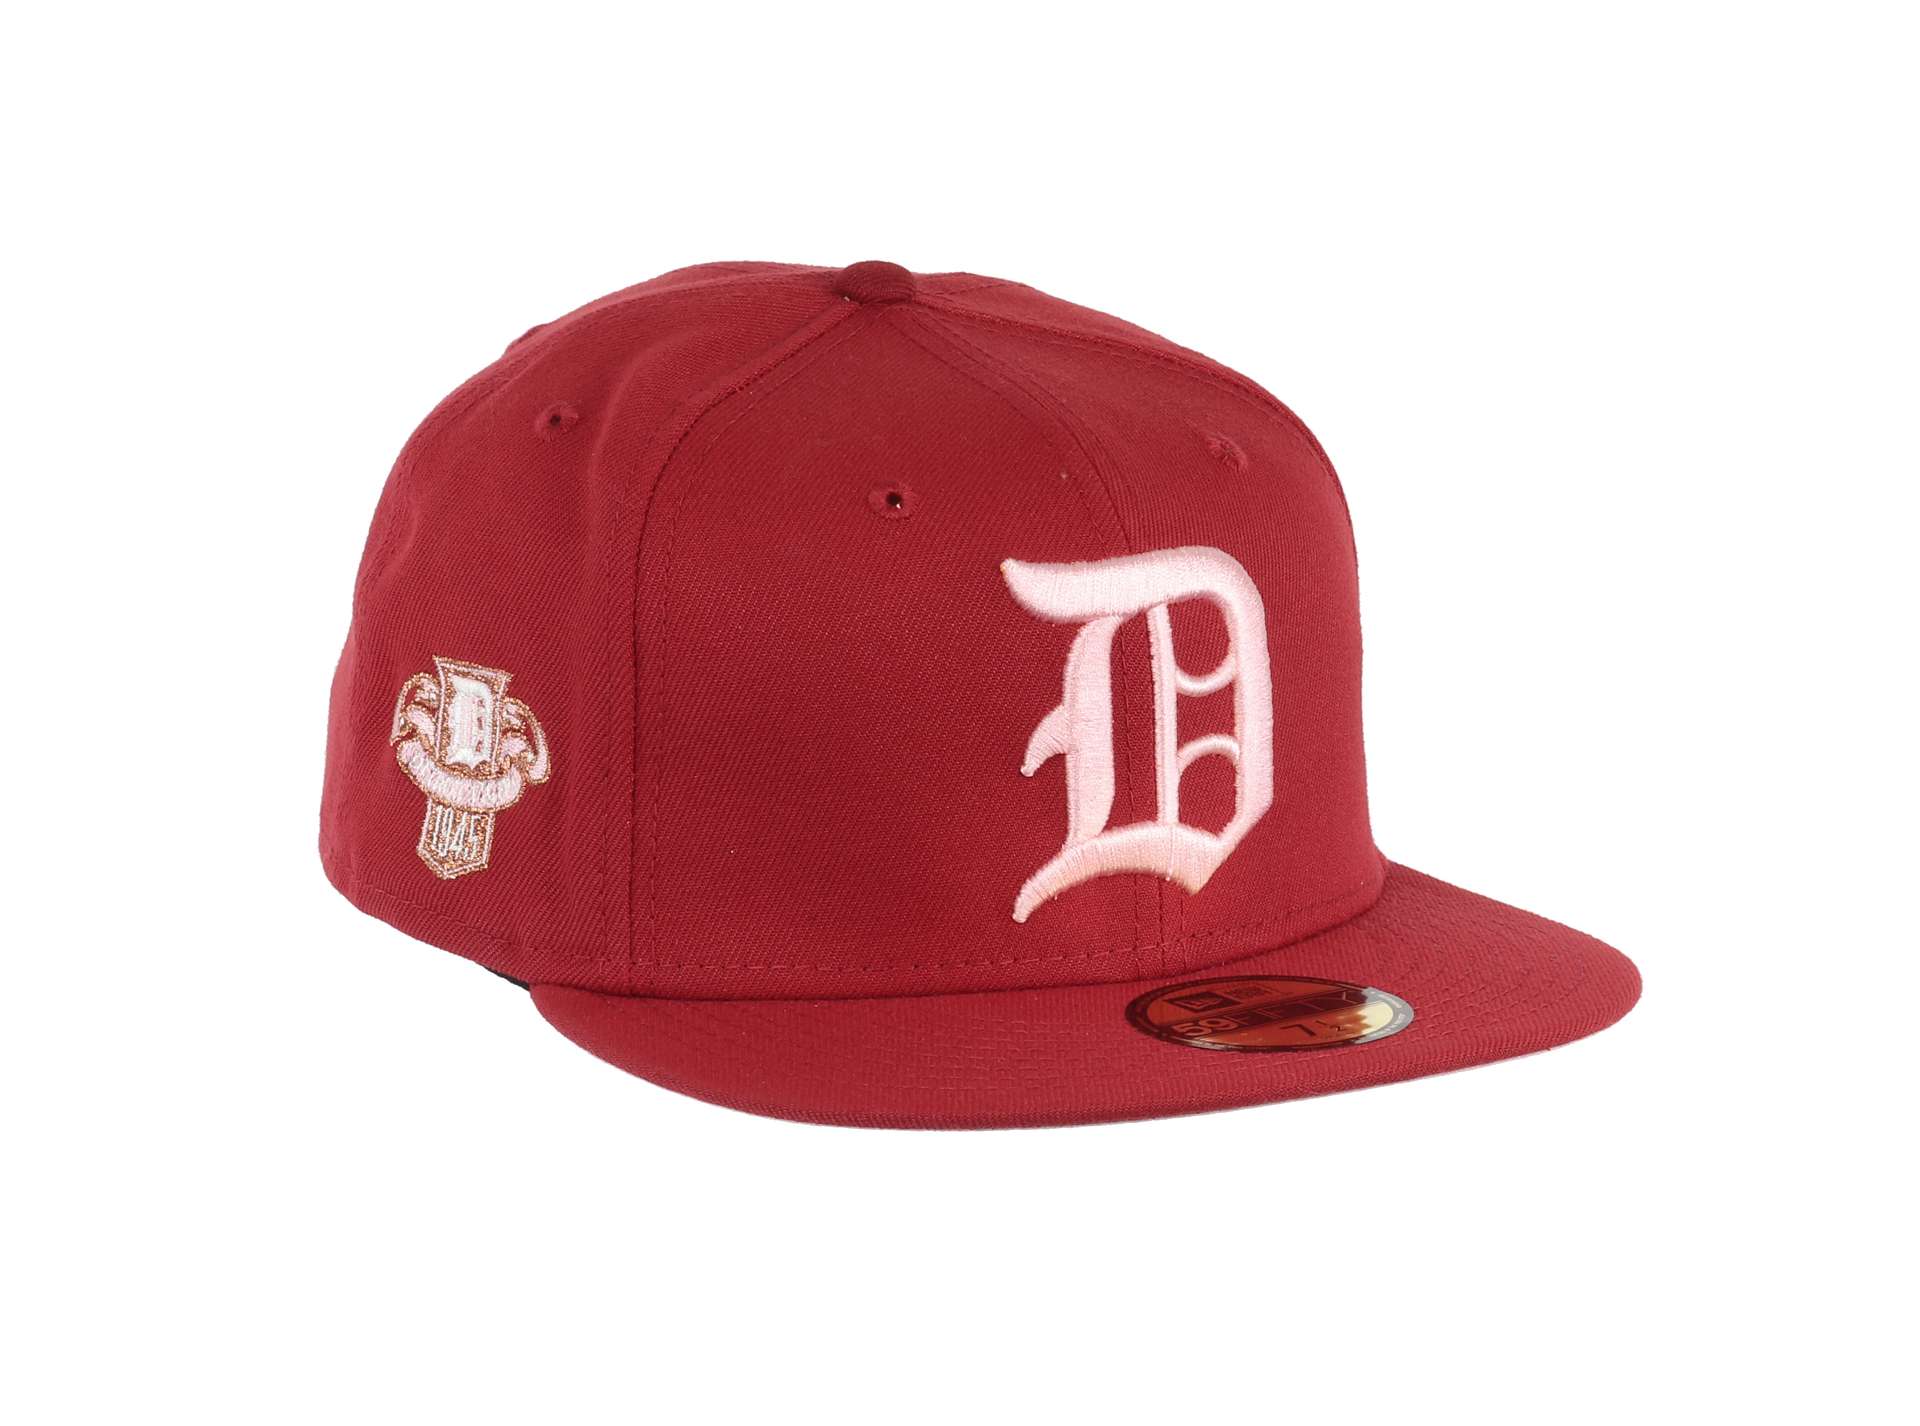 Detroit Tigers MLB Cooperstown American League Title 1945 Sidepatch Pinot Red 59Fifty Basecap New Era